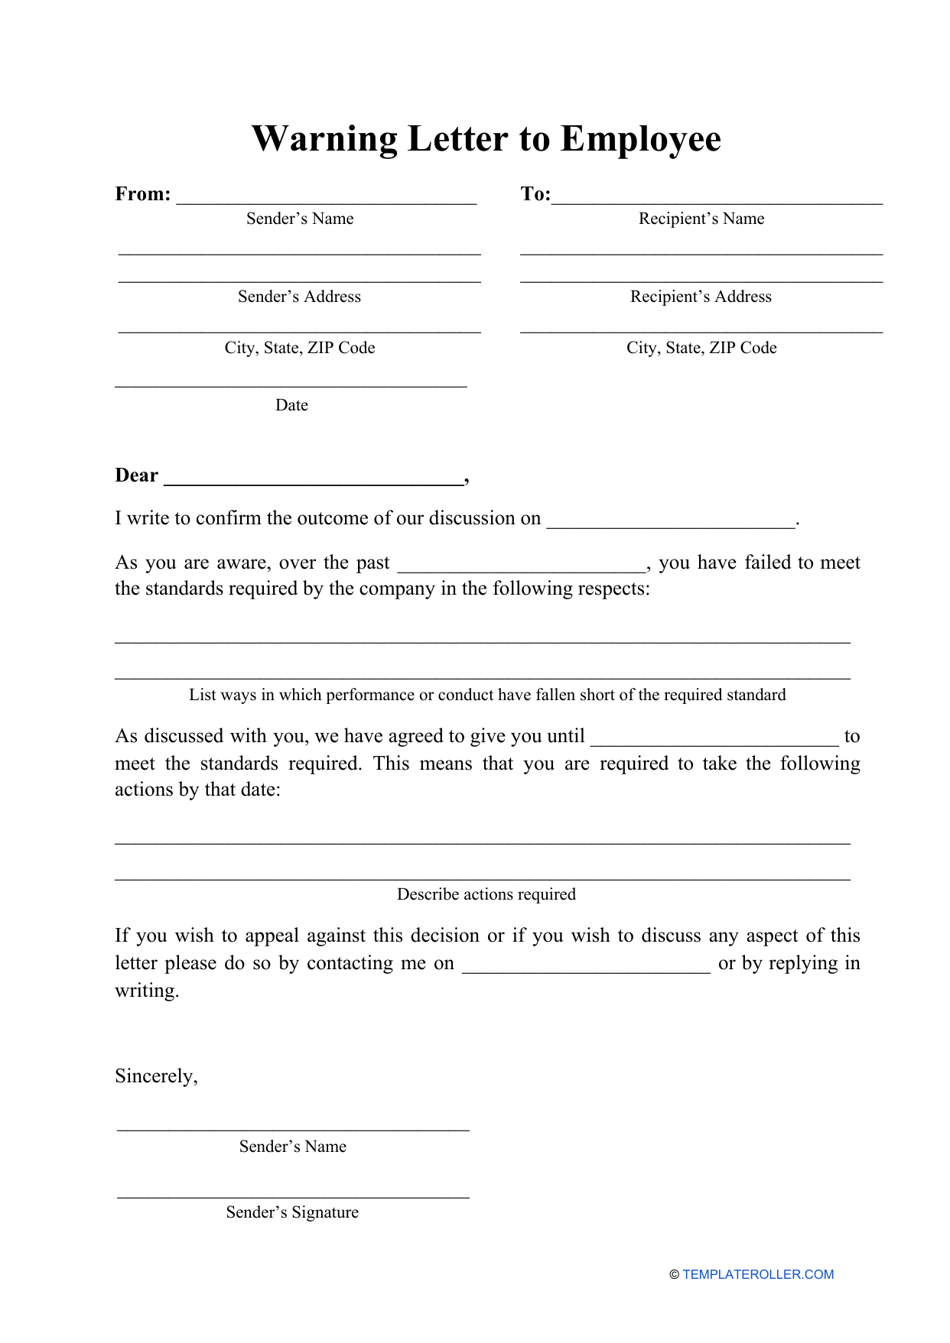 Warning Letter To Employee Template Fill Out Sign Online And Download Pdf Templateroller